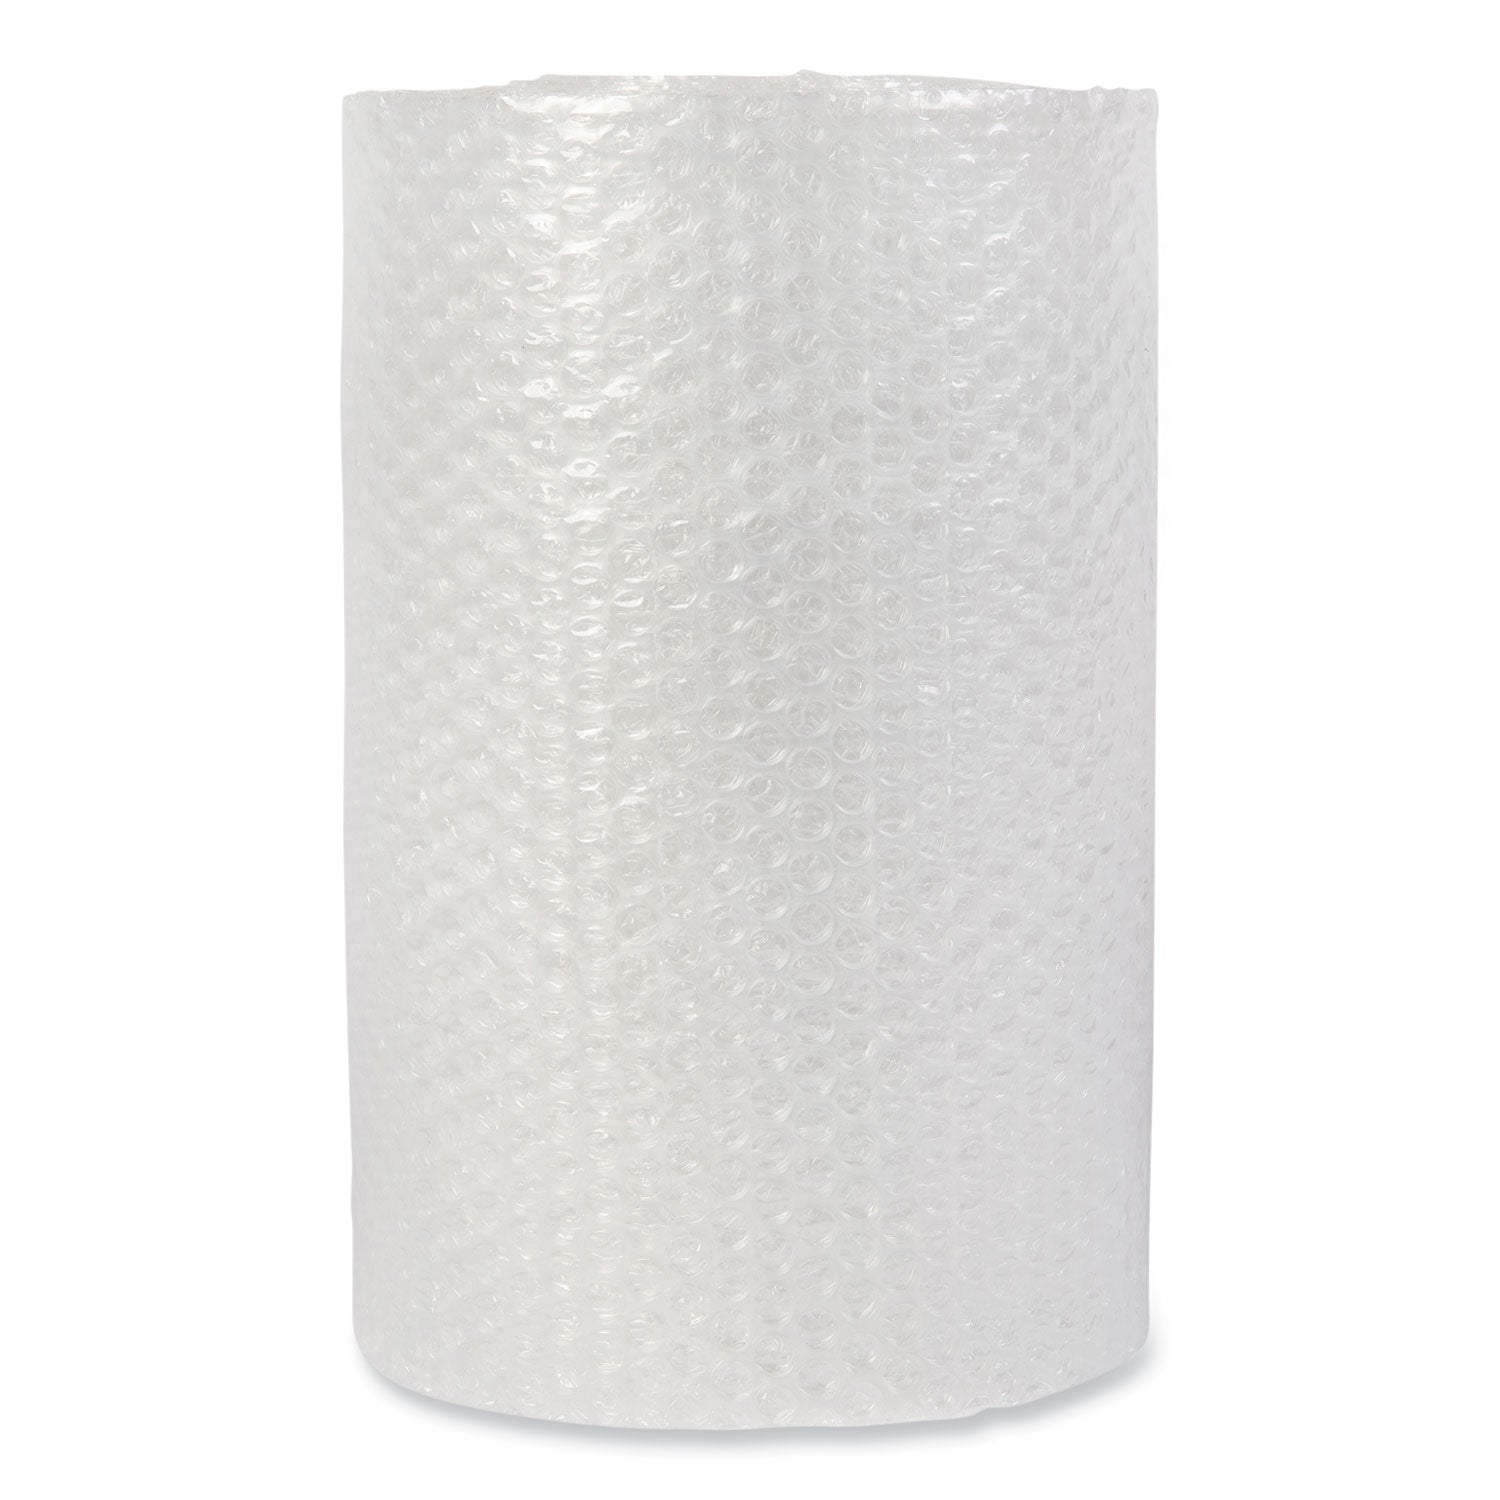 bubble-packaging-031-thick-24-x-75-ft-perforated-every-24-clear-4-carton_unv4087909 - 2